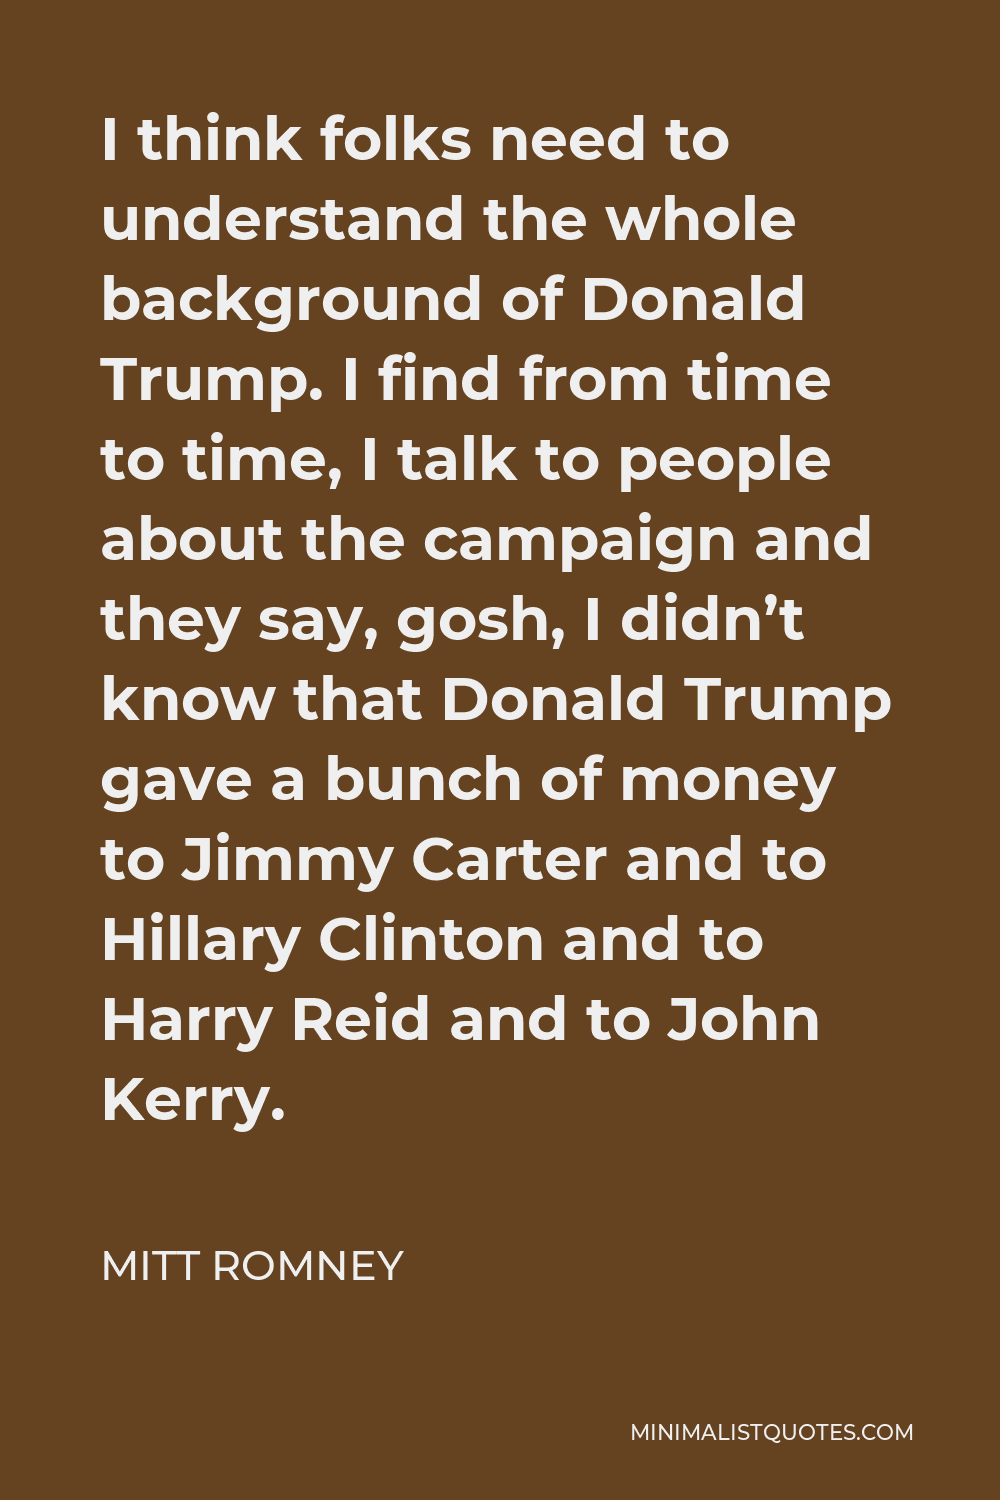 Mitt Romney Quote - I think folks need to understand the whole background of Donald Trump. I find from time to time, I talk to people about the campaign and they say, gosh, I didn’t know that Donald Trump gave a bunch of money to Jimmy Carter and to Hillary Clinton and to Harry Reid and to John Kerry.